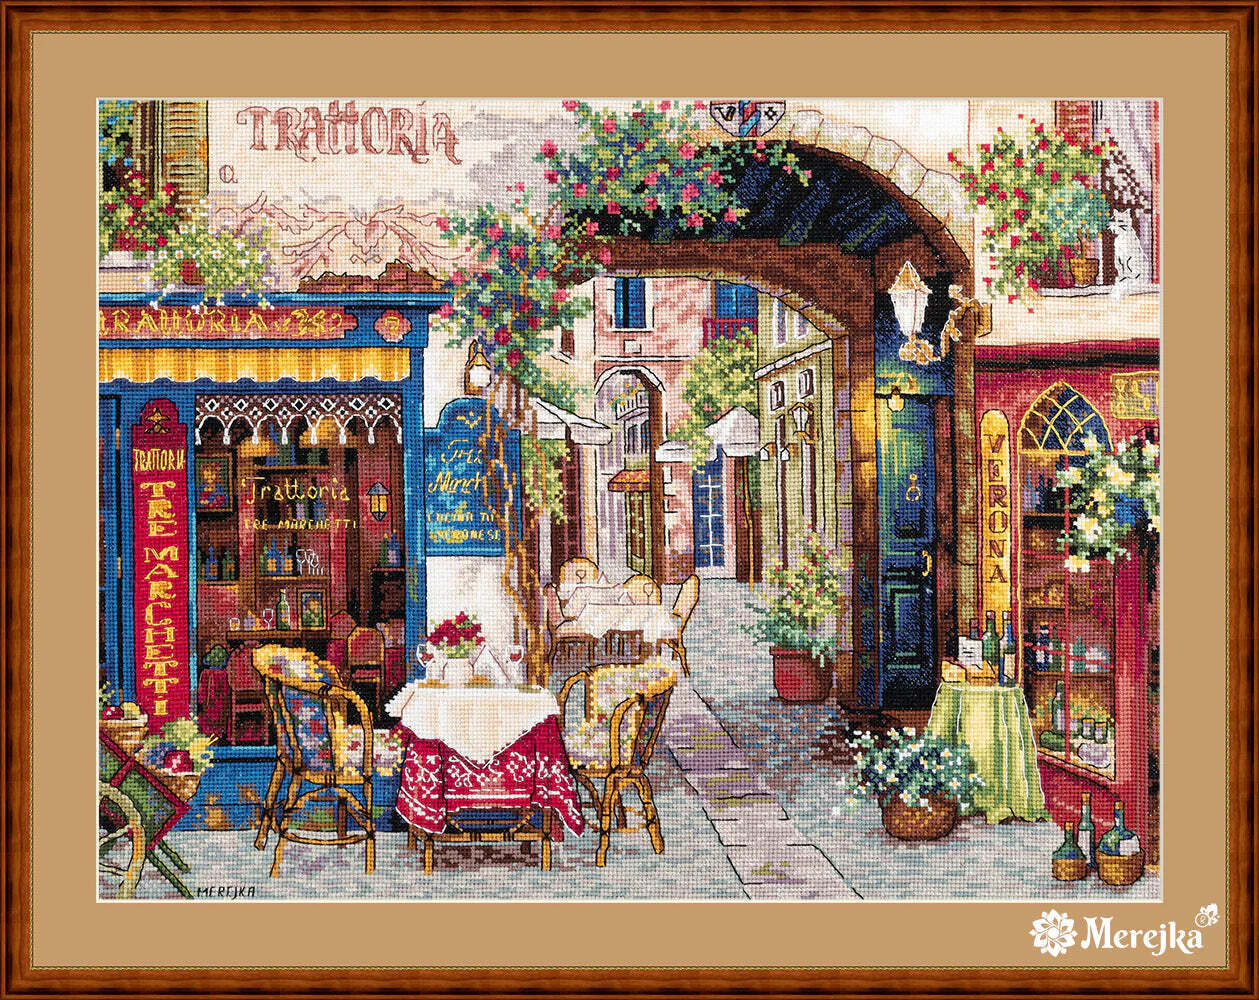 Merejka Counted Cross Stitch Kit Cafe in Verona K-161